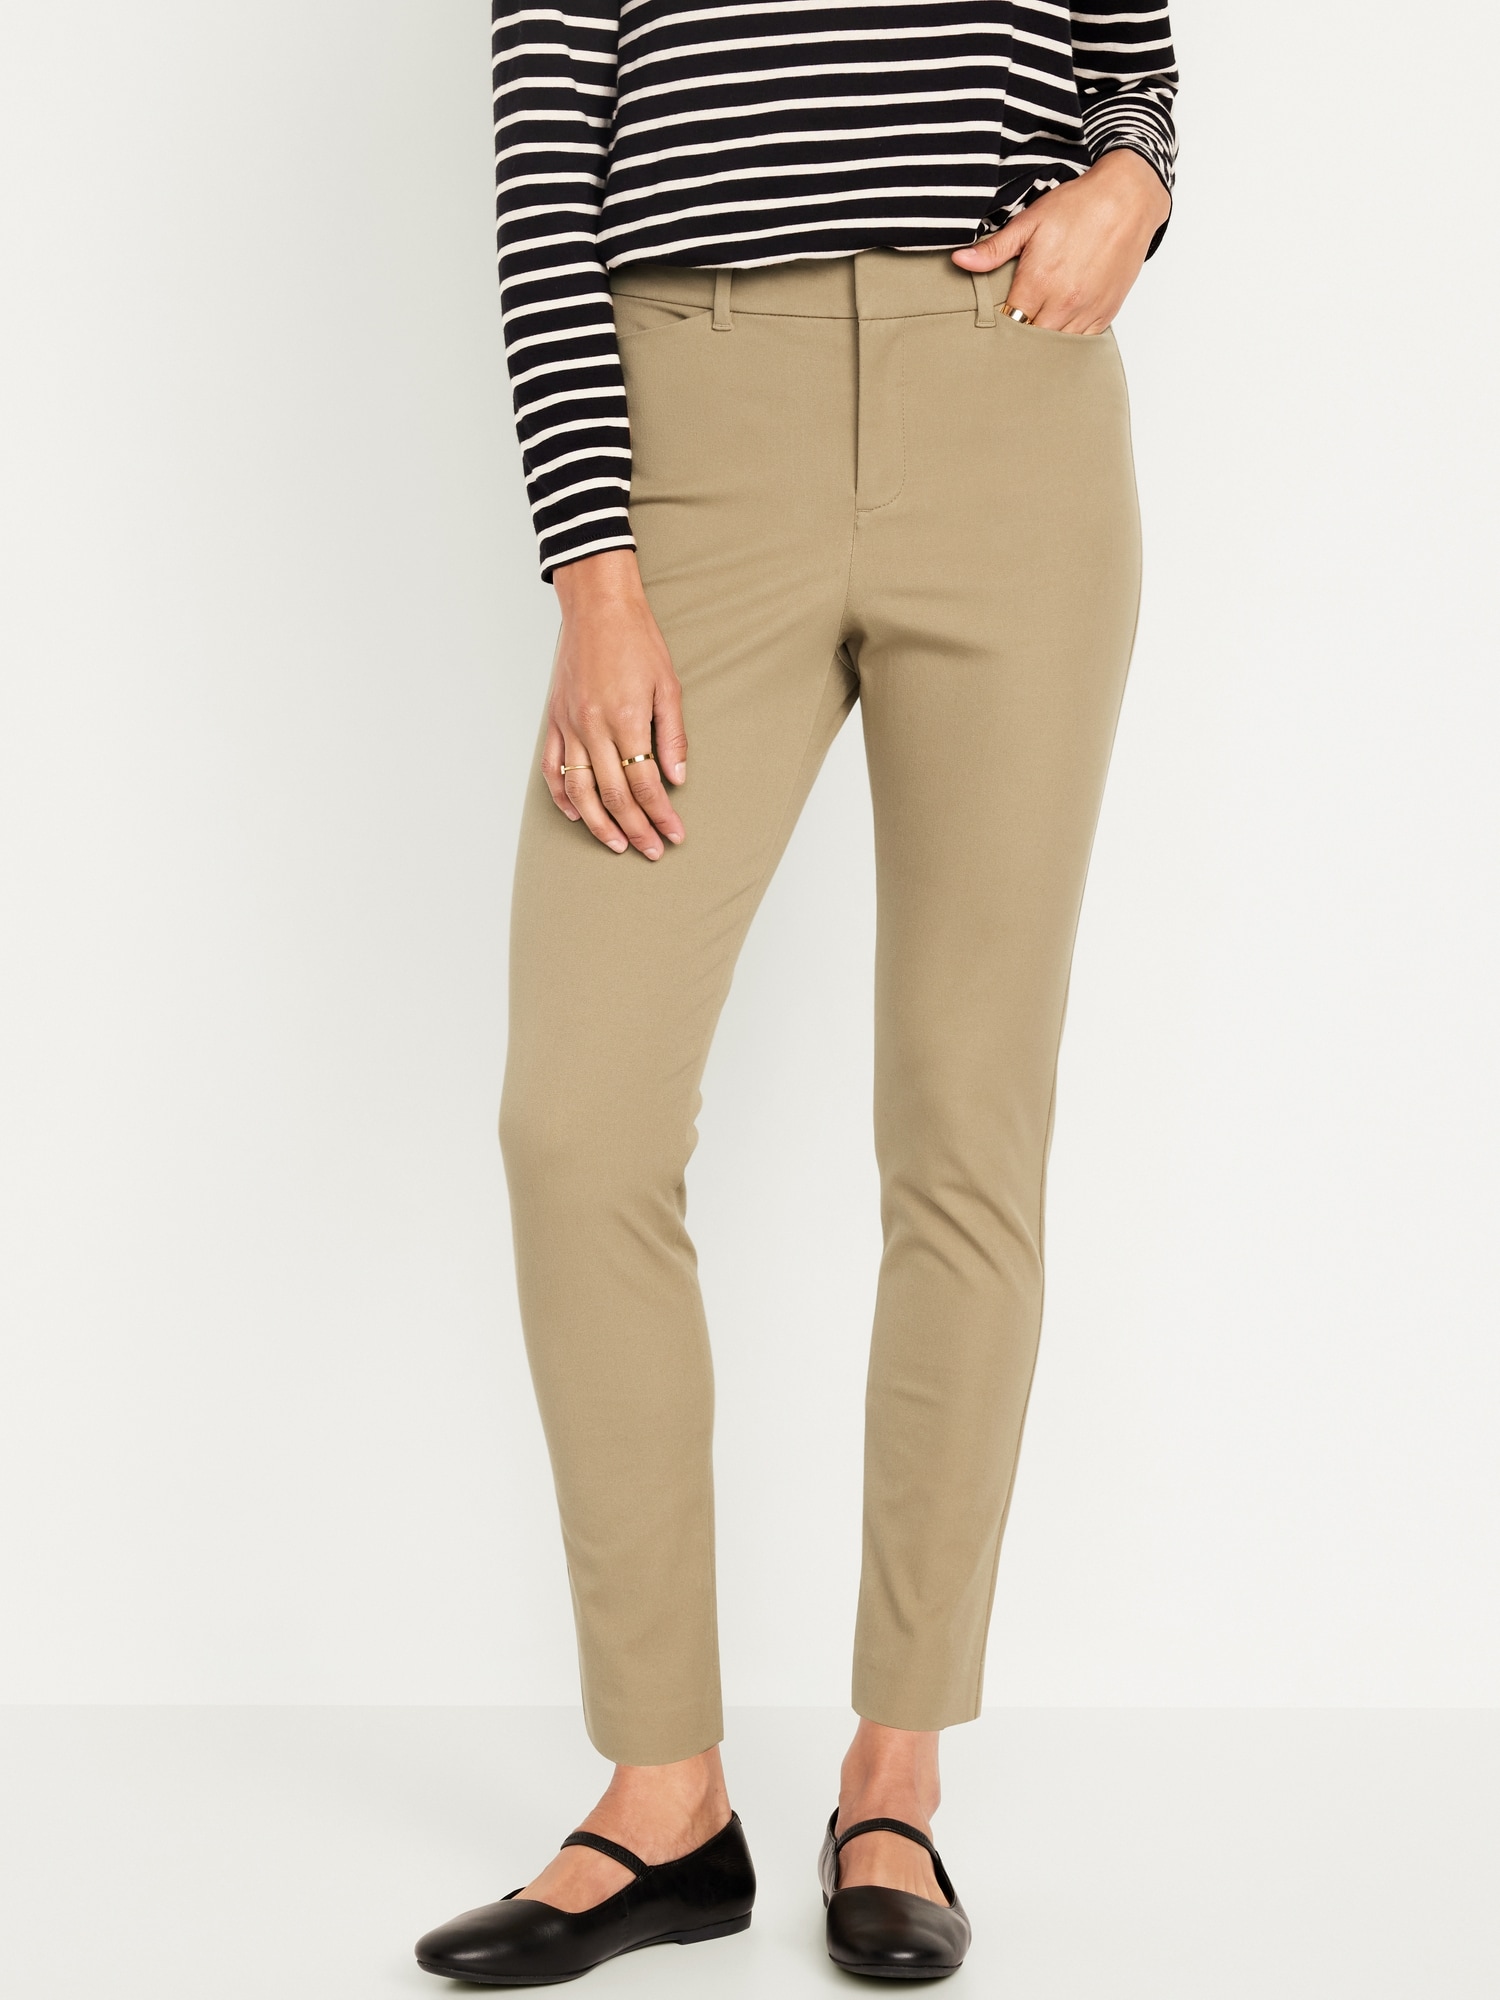 Old Navy All-New Mid-Rise Pixie Ankle Pants for Women  Pants for women, Ankle  pants, Celebrities fall fashion